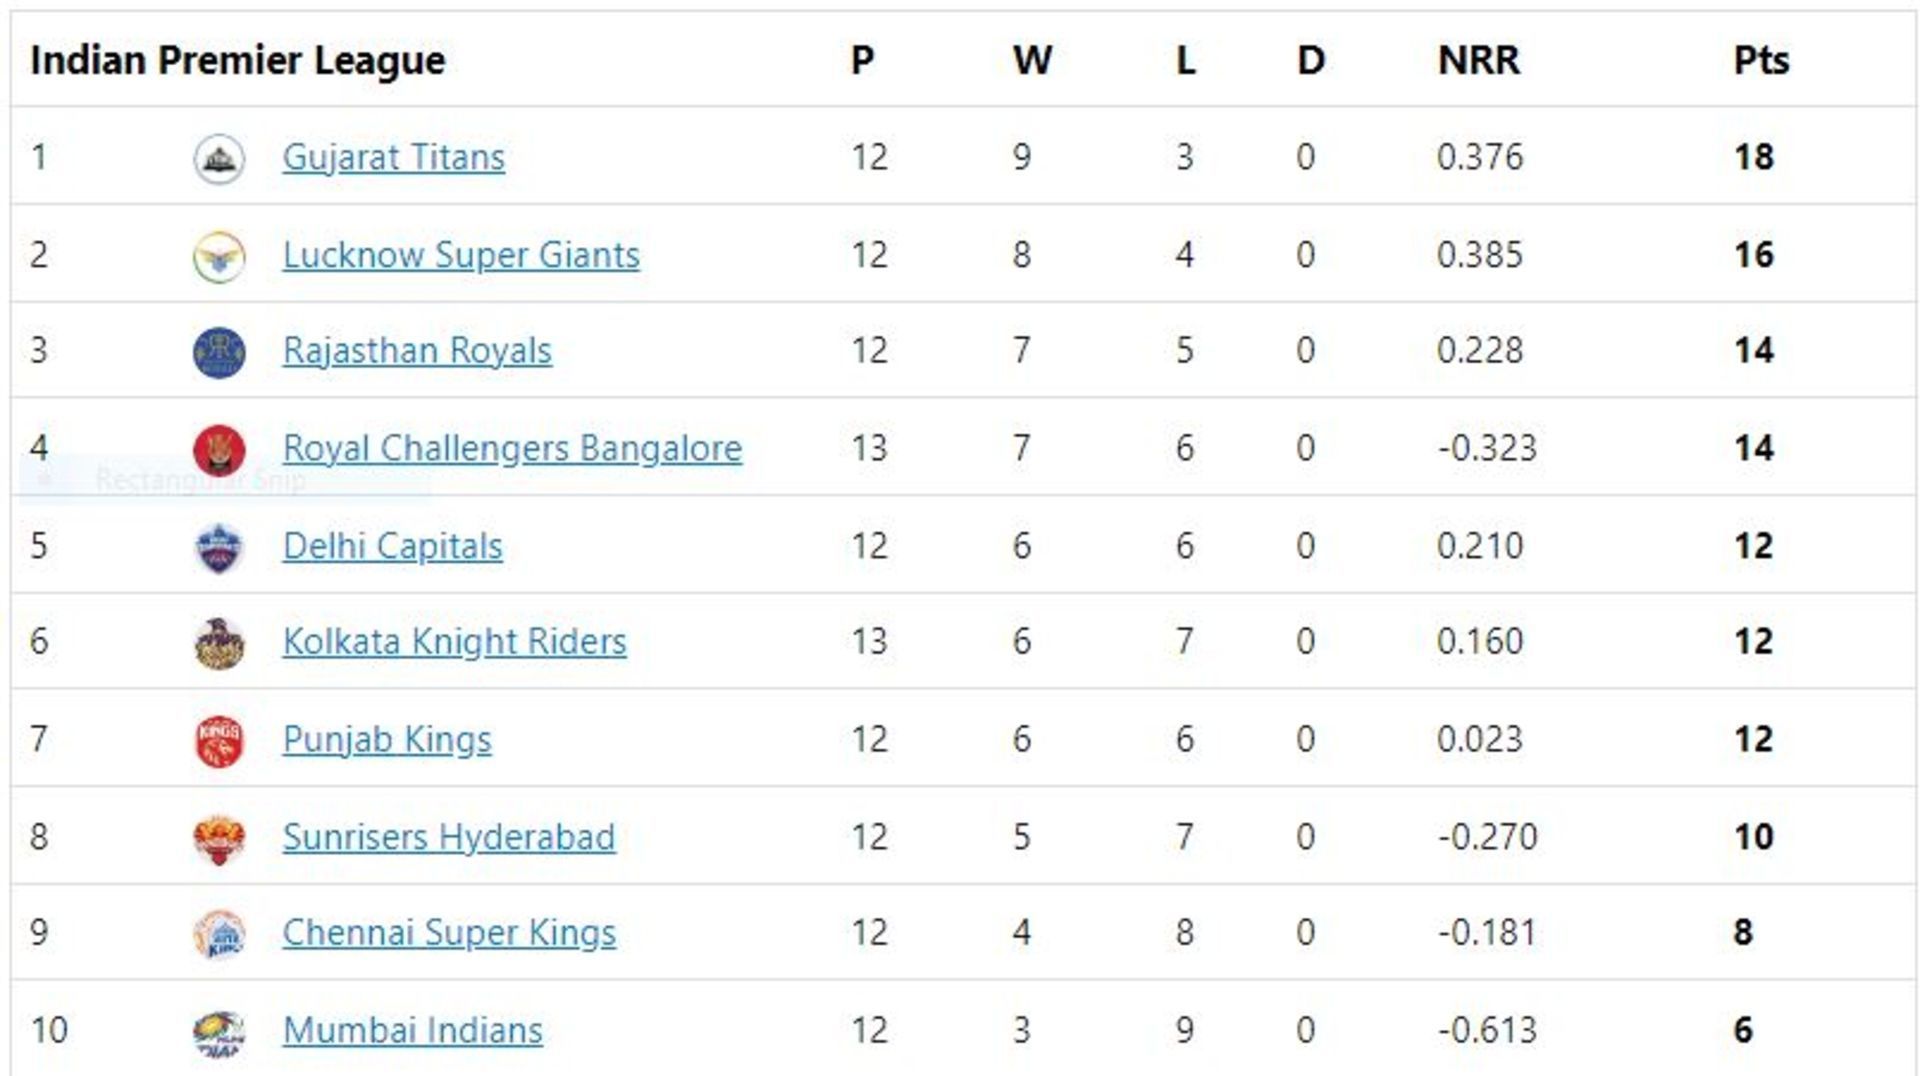 KKR are still in the hunt for a playoff spot